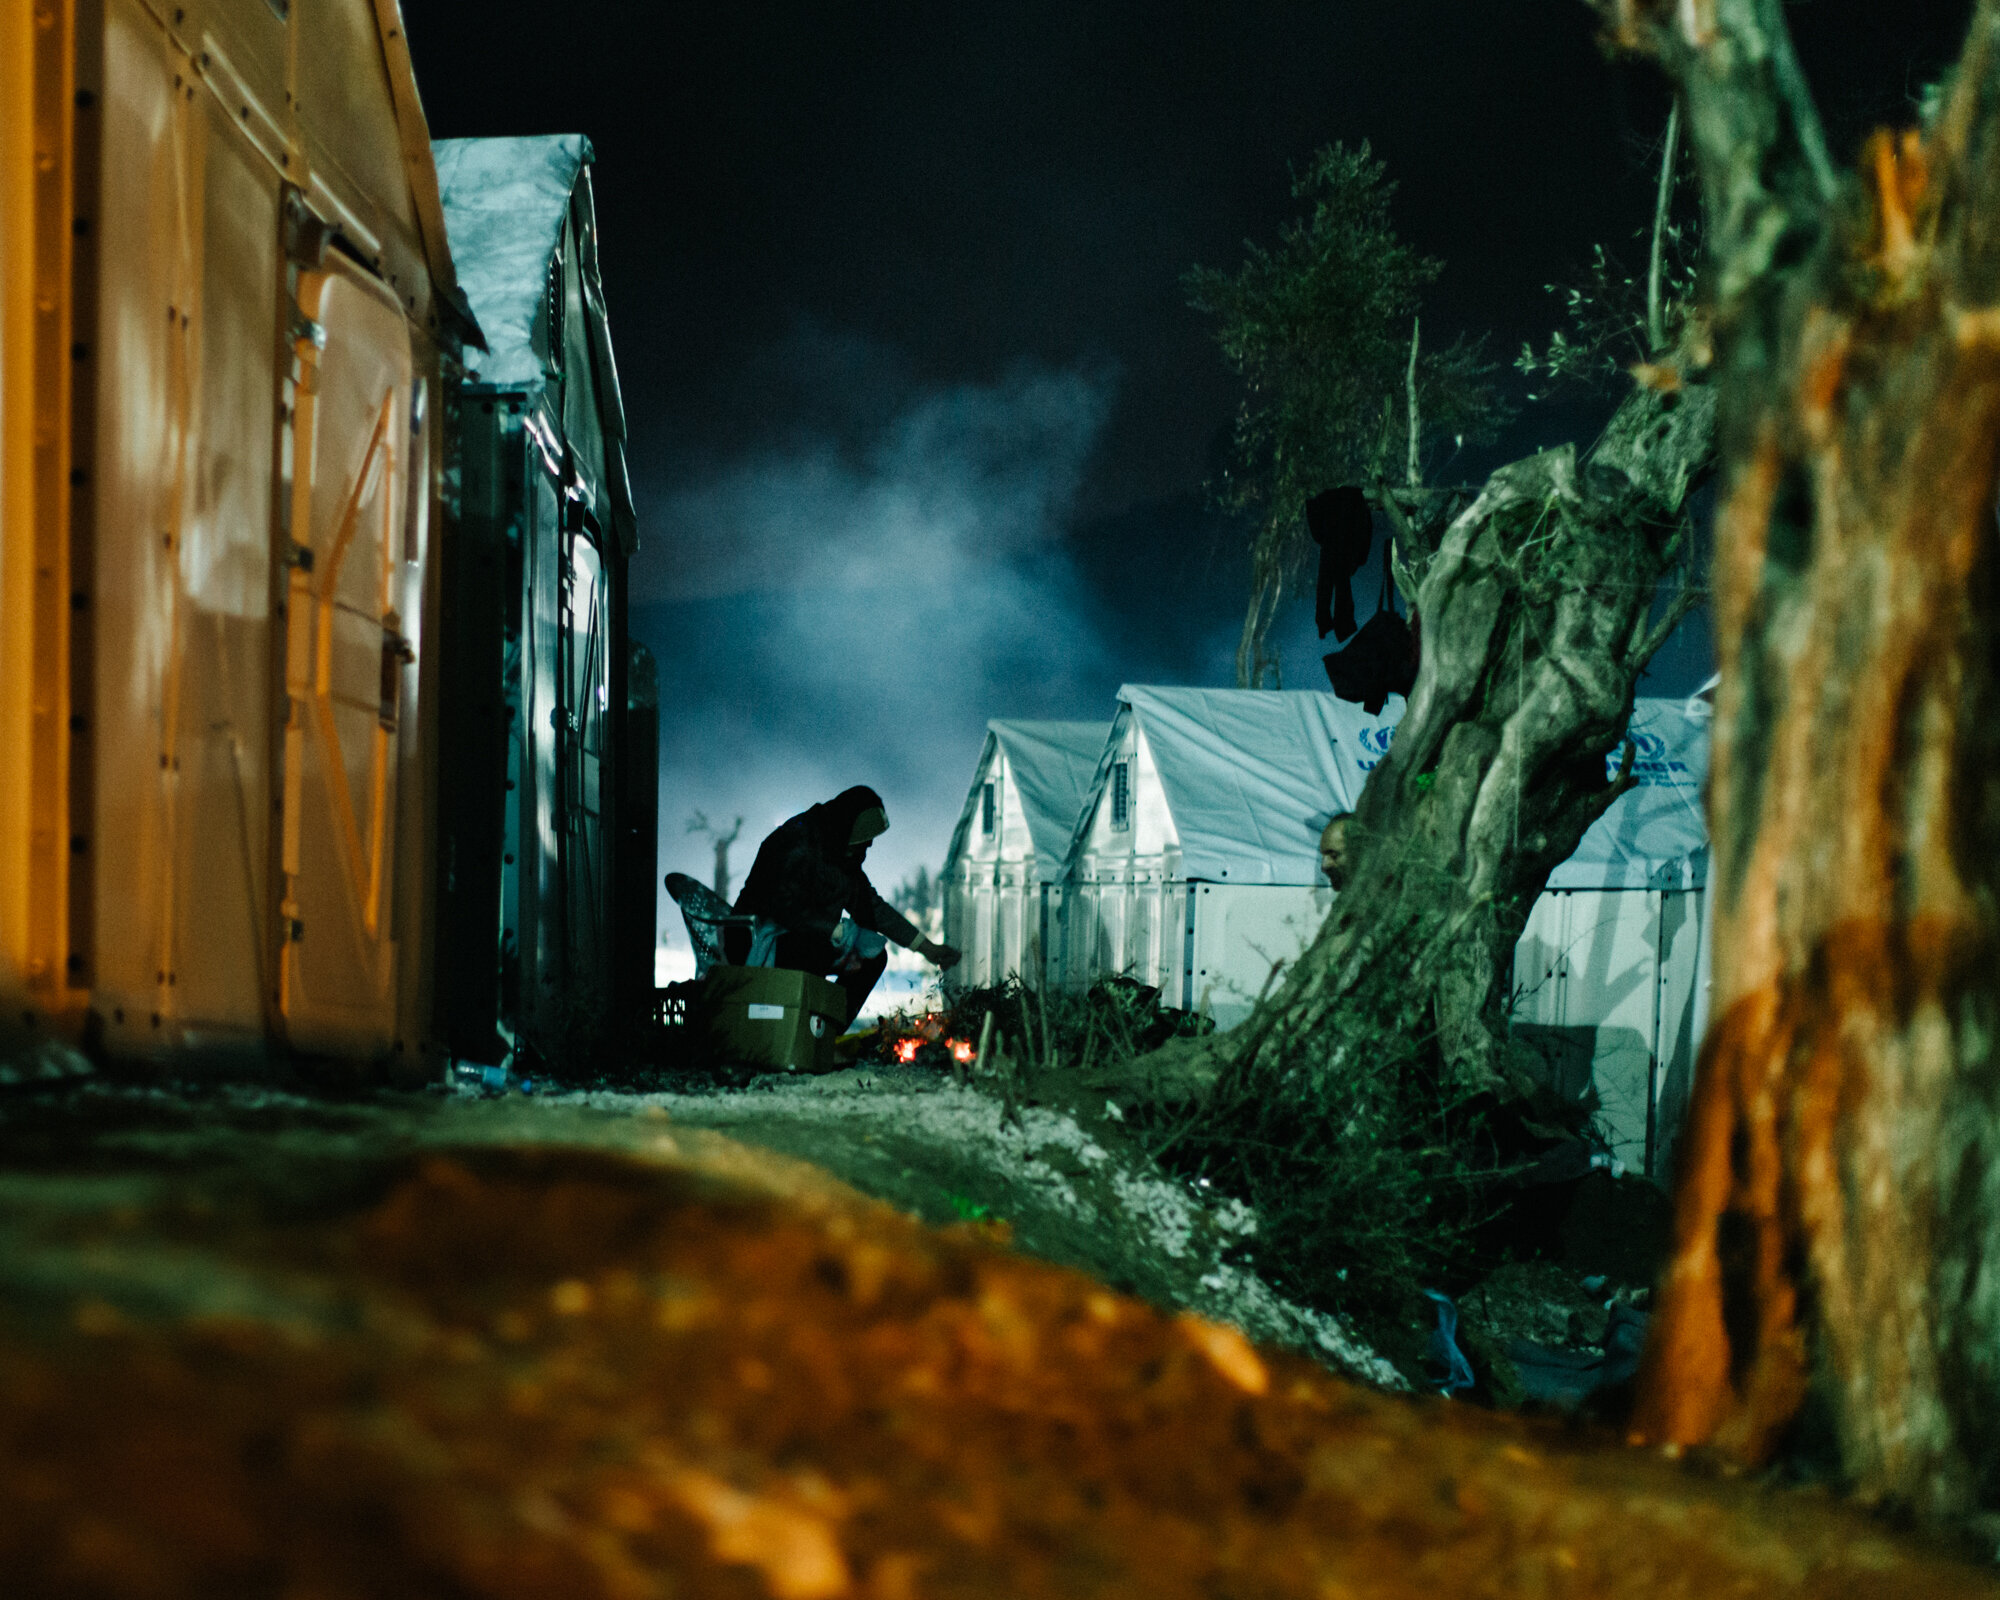  A man warms himself by a fire on a cold winter night in Moria.  